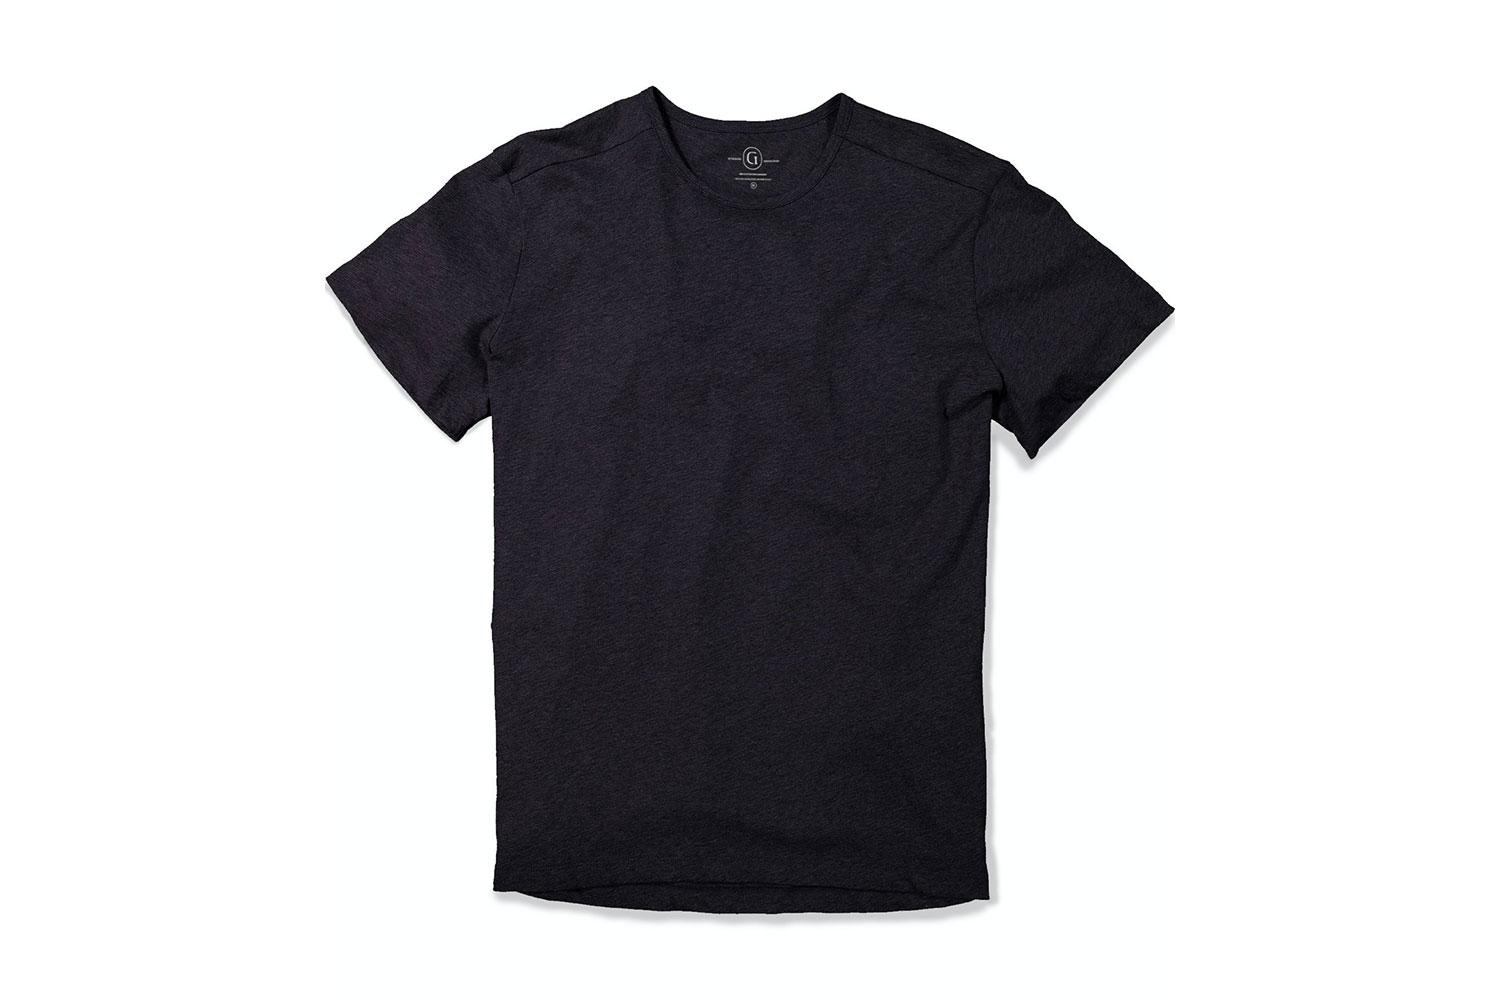 The 18 Best T-Shirts for Men in 2021 - The Manual